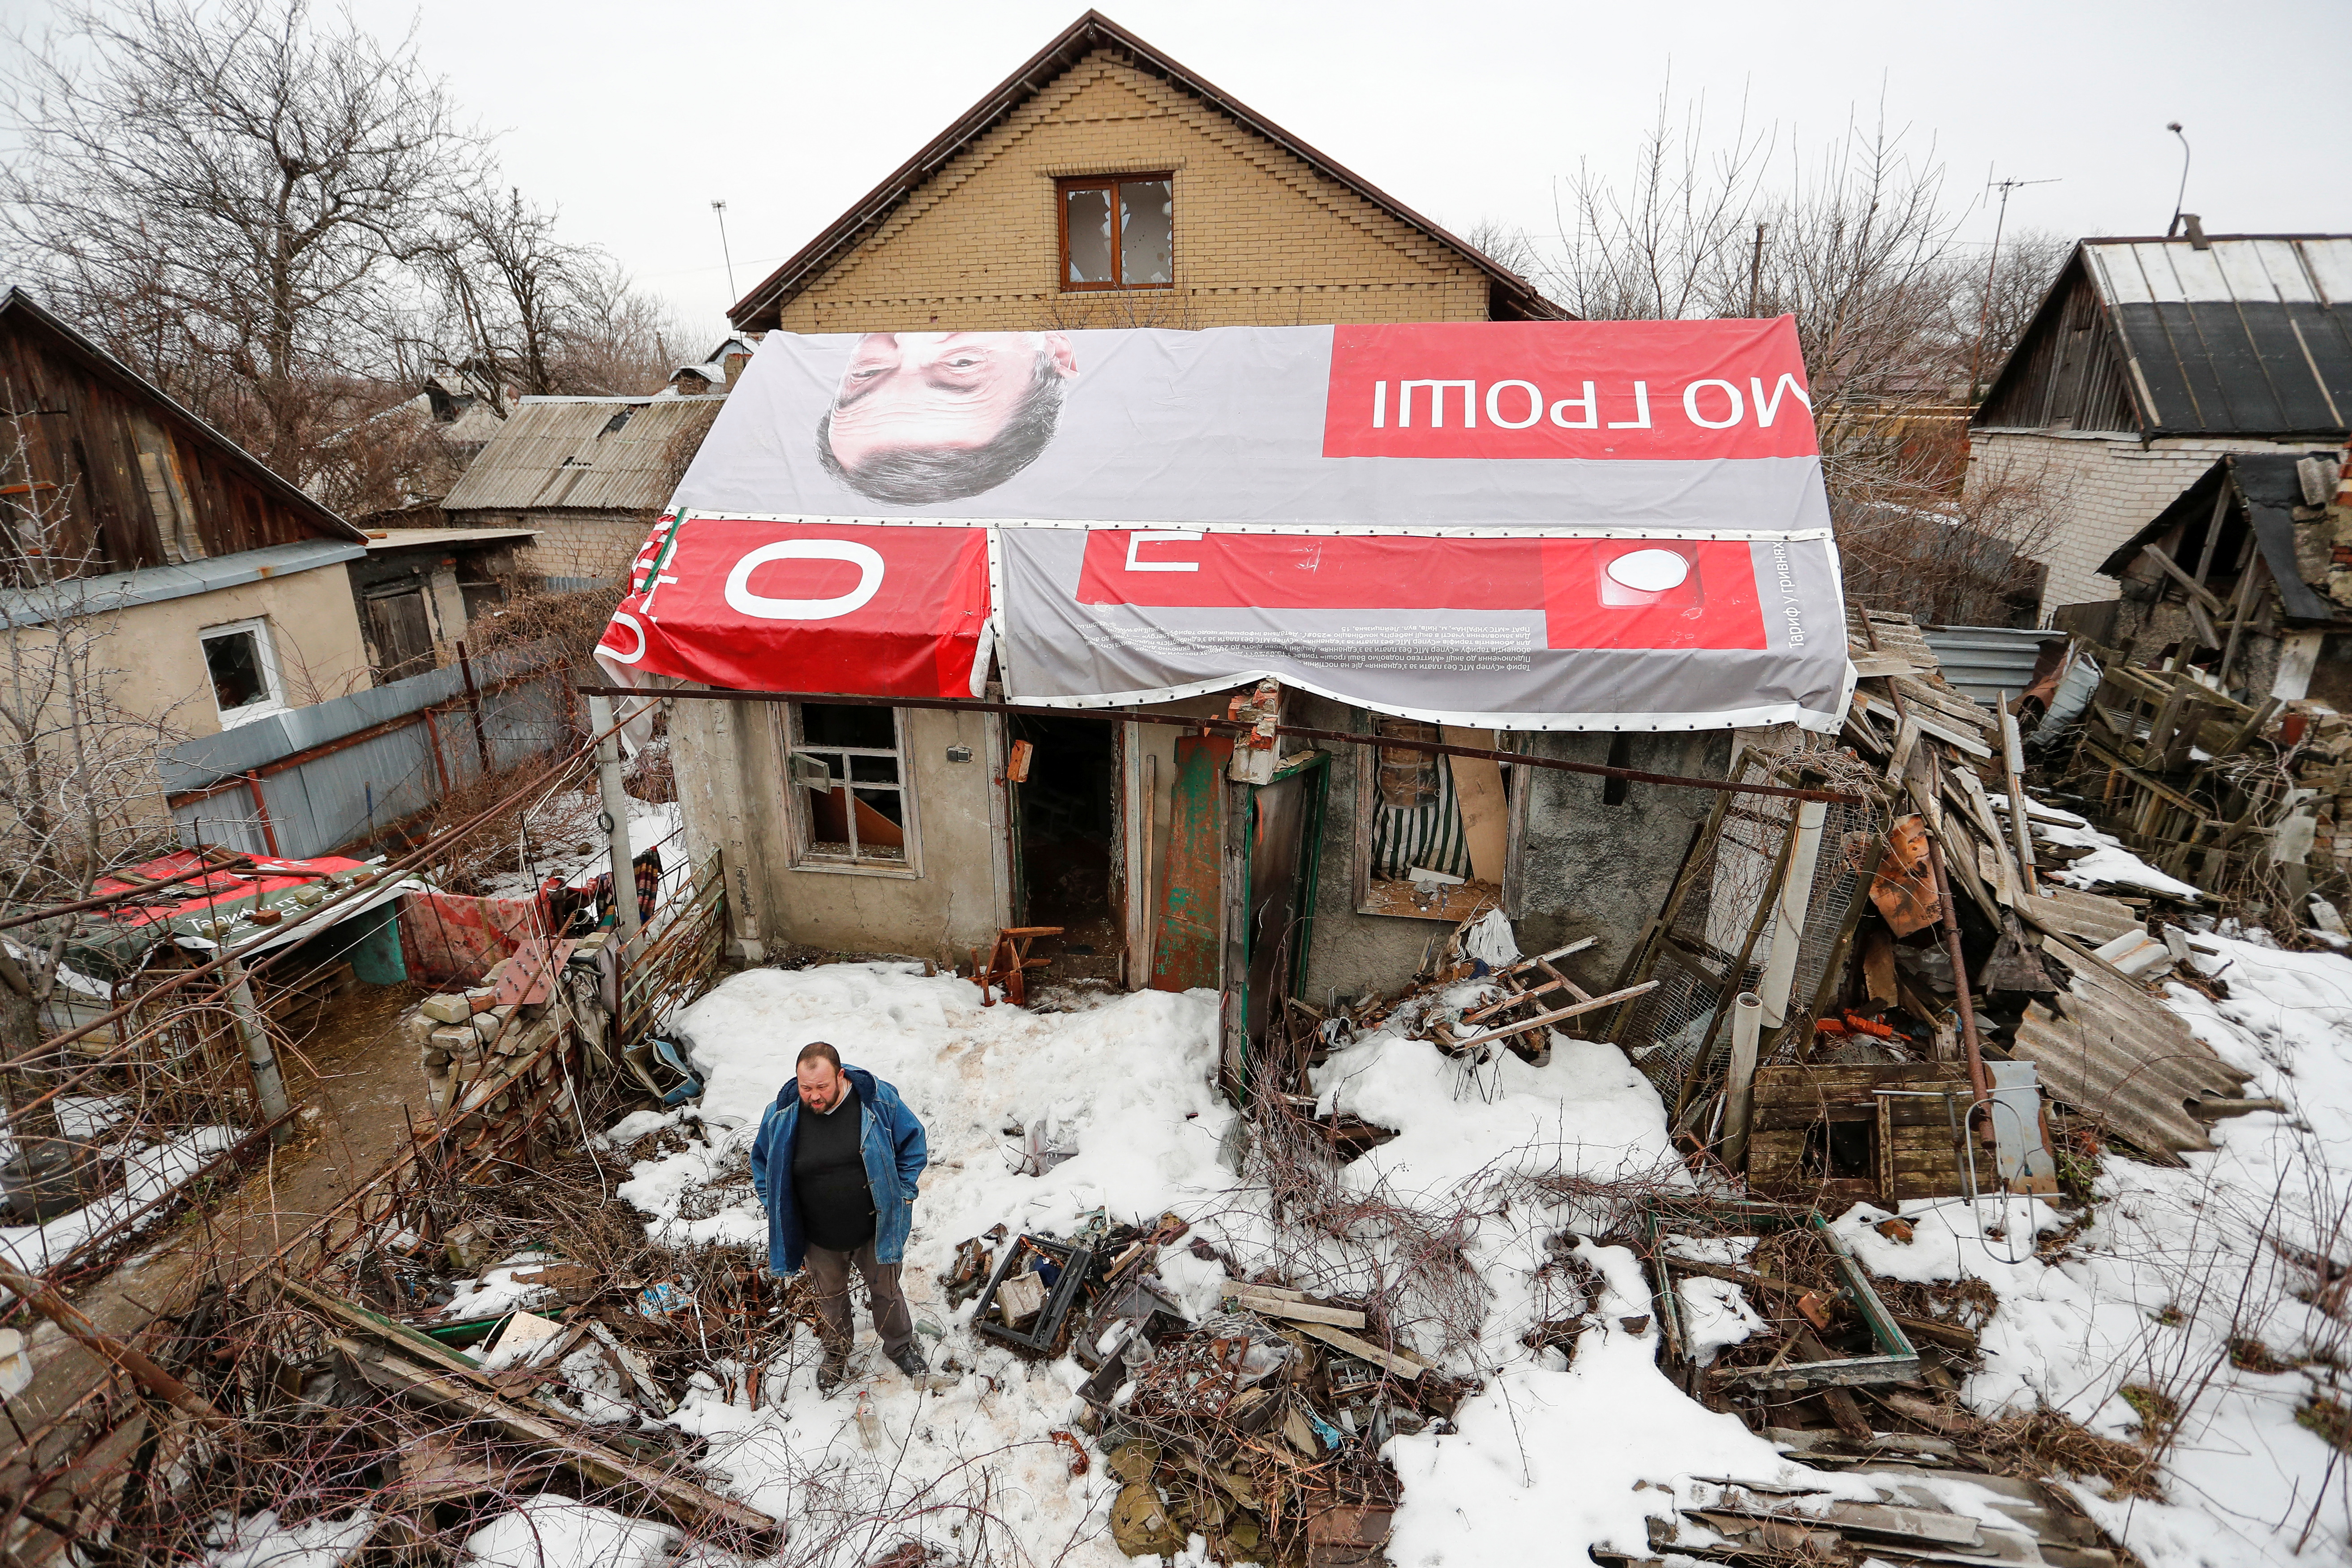 Local resident Boyko stands next to his workshop, damaged by shelling, on the outskirts of rebel-held Donetsk